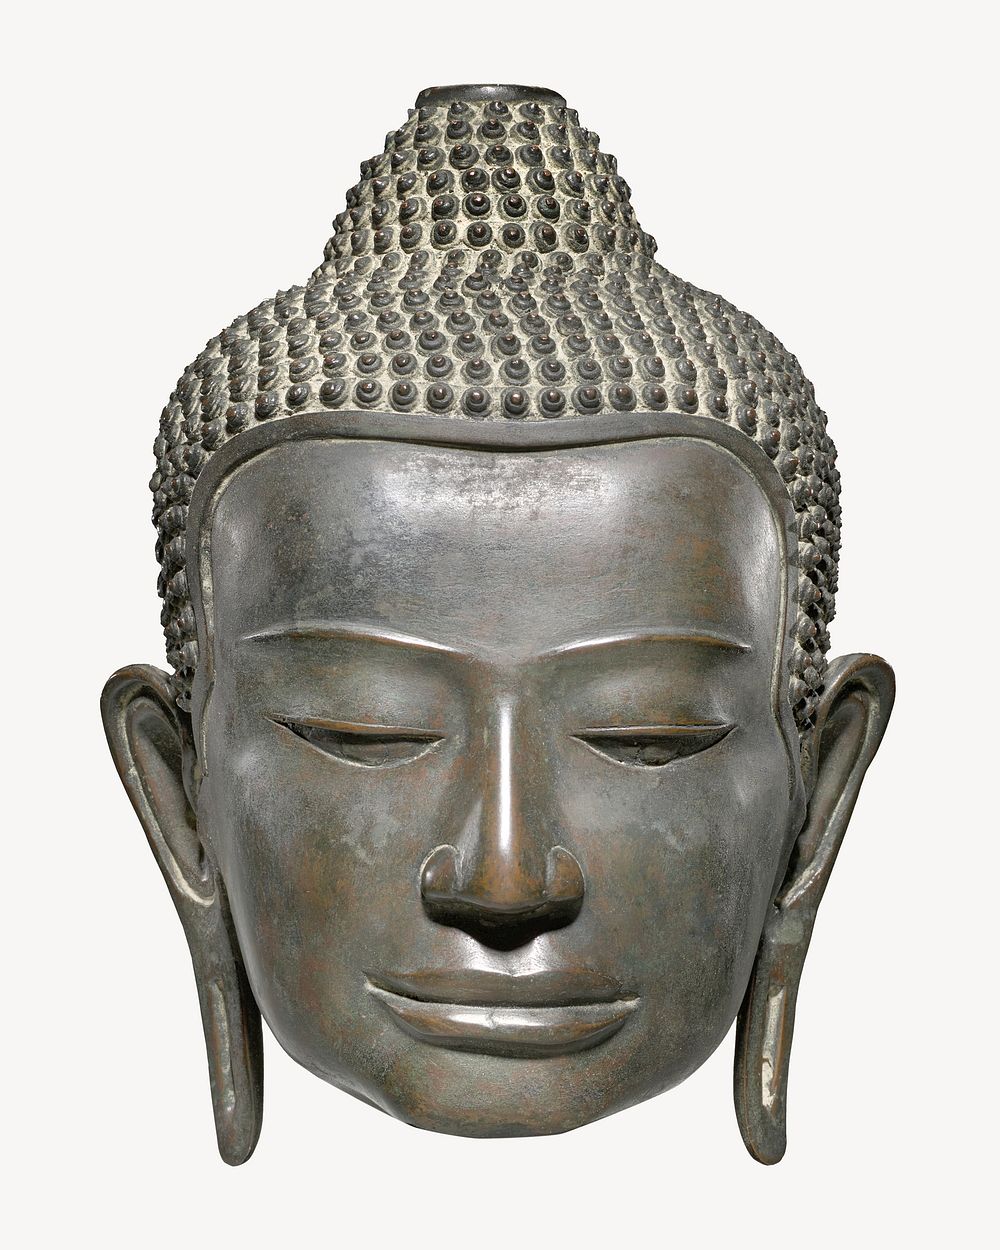 Aesthetic Buddha head sculpture.  Remastered by rawpixel